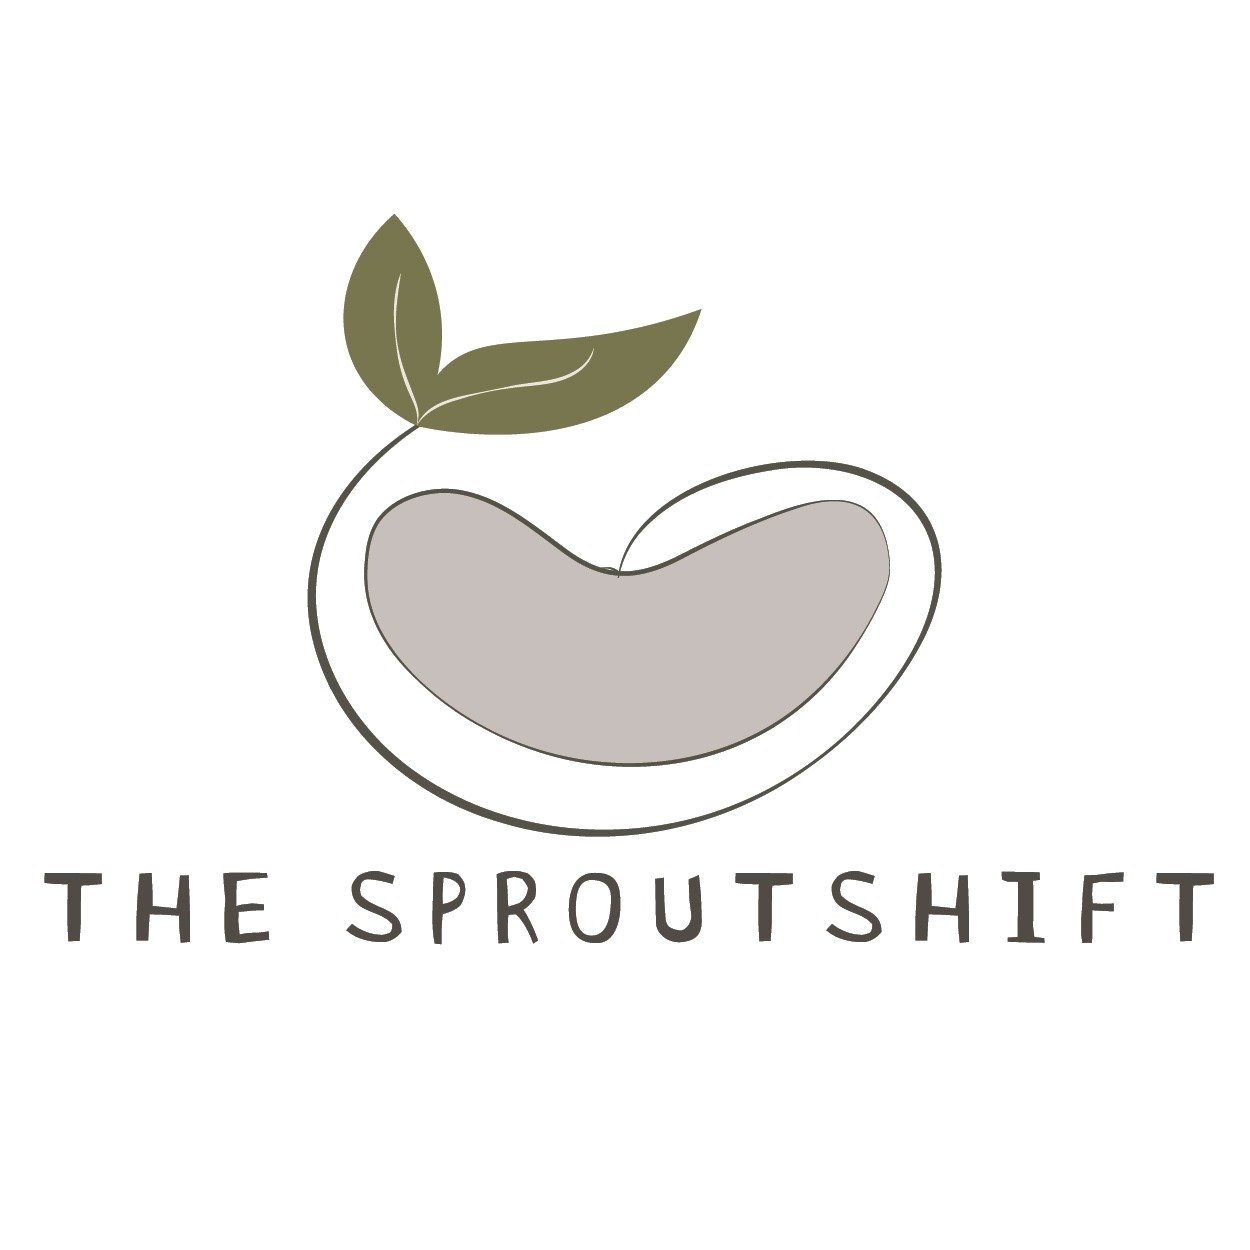 The SproutShift